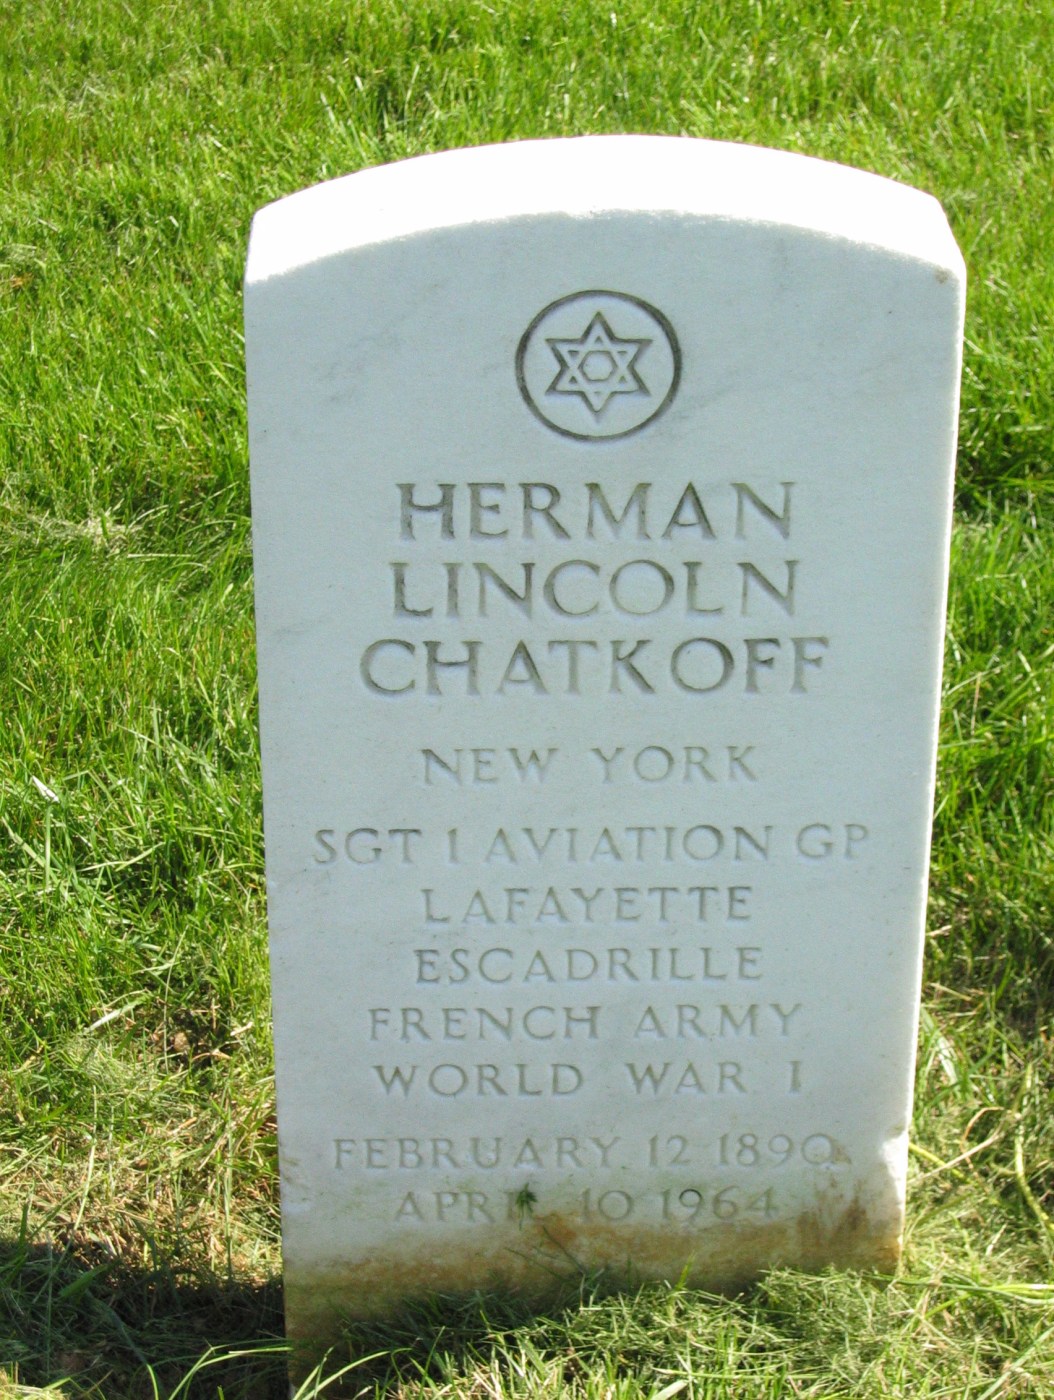 Headstone for Herman Chatkoff, who enlisted in the French Foreign Legion in 1914 and later became a pilot in a French squadron (but not the Lafayette Escadrille as the marker claims). Although he never served in the U.S. military, a 1920 Congressional Act allowed him to be buried in Baltimore National Cemetery. (findagrave.com)